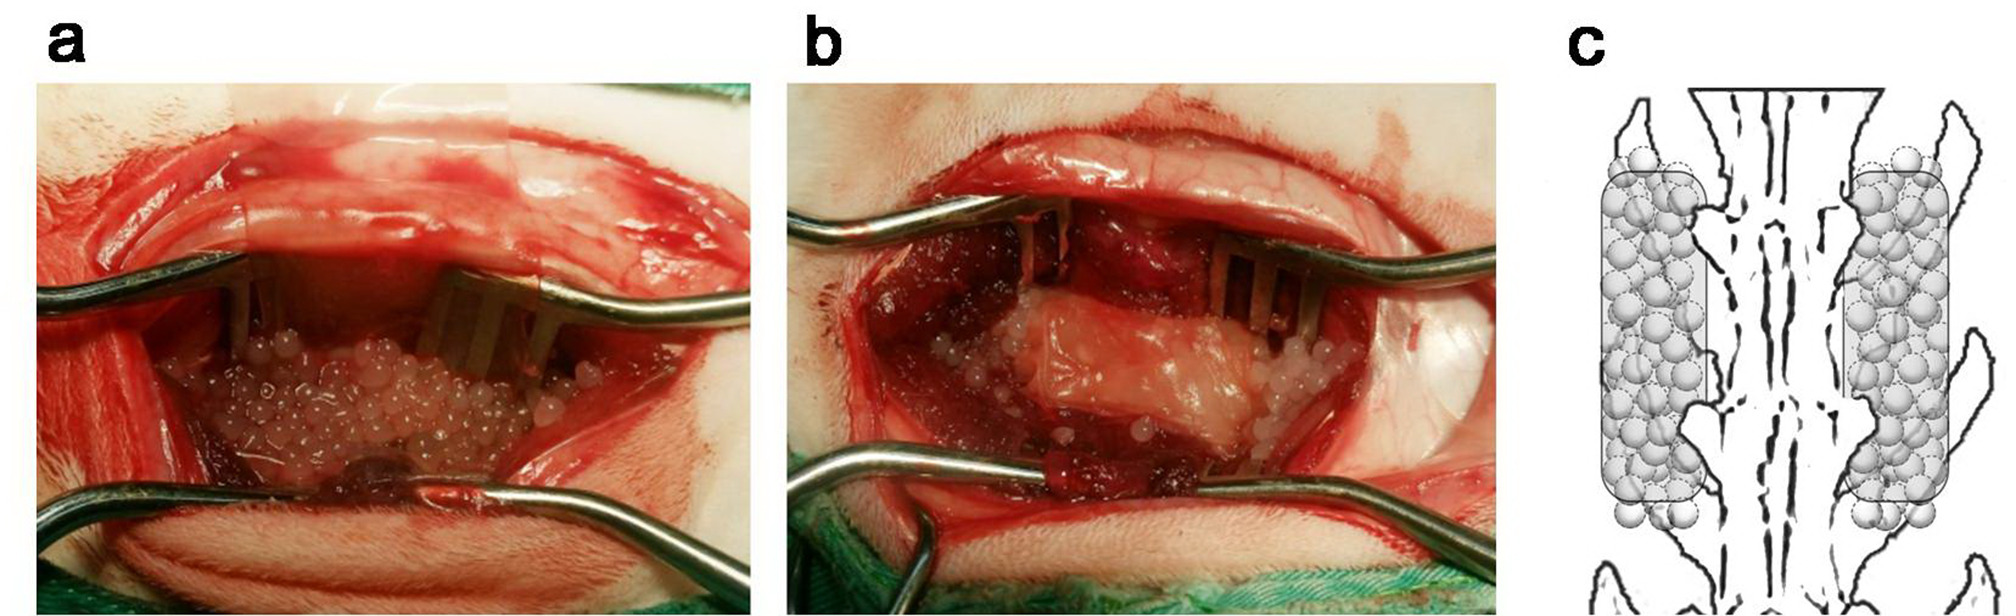 Fig. 2 
            Photographs demonstrating the appearance of the bone graft materials, and schematic of the exact anatomical location of the material implanted. a) Alginate bead materials without collagen/chitosan cell sheet wrapping. b) Alginate bead materials wrapped with collagen/chitosan cell sheet to fabricate a bone-periosteum composite implanted between L4 and L5 transverse space. c) Exact anatomical location of the material implanted in bilateral L4-L5 inter-transverse spaces.
          